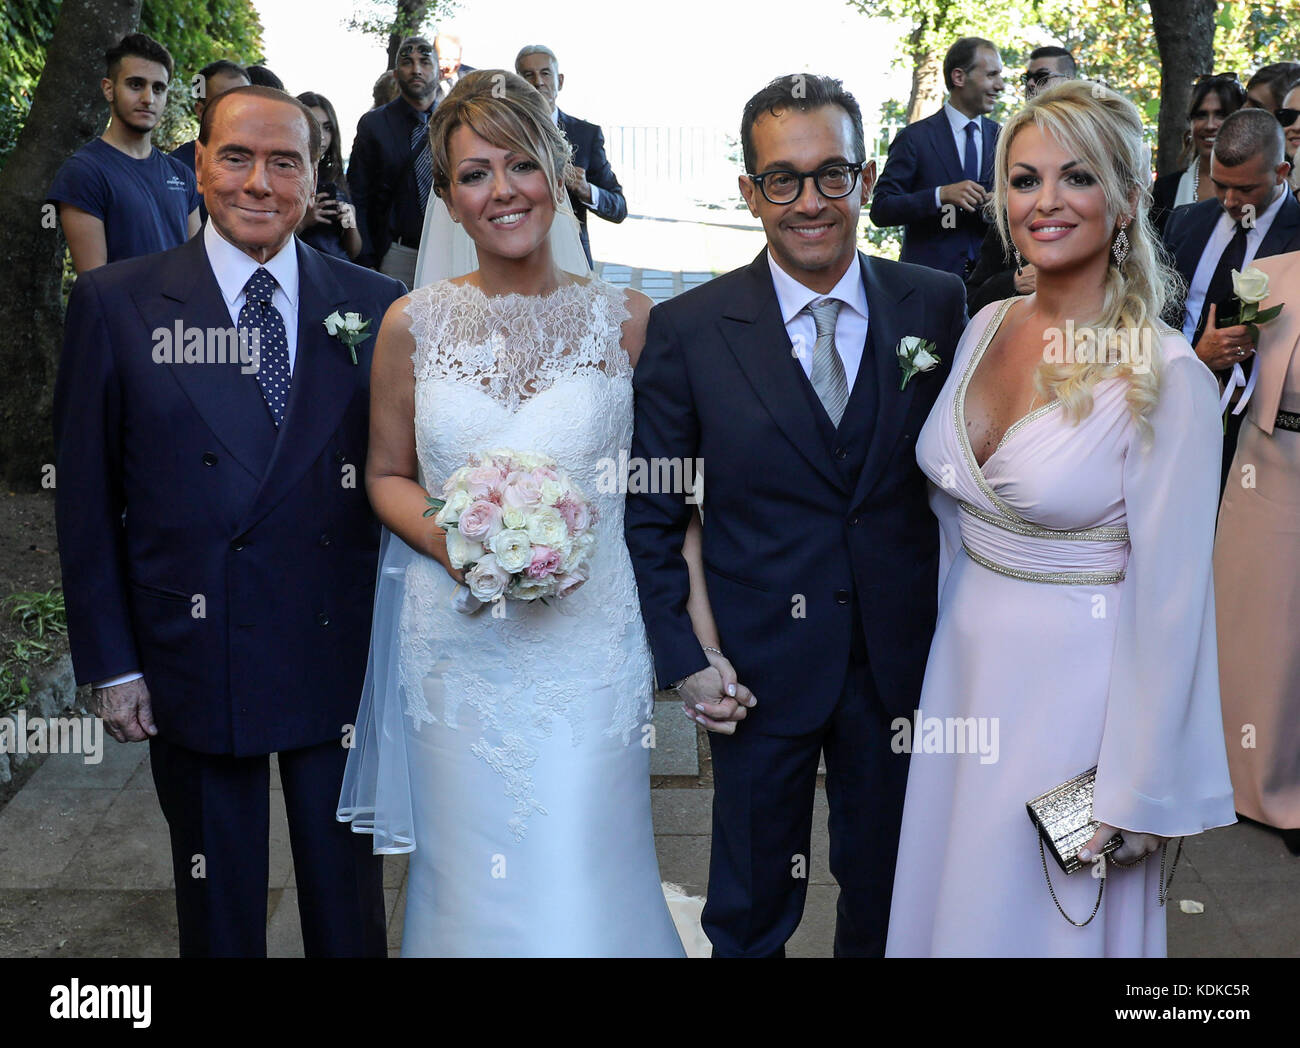 Silvio Berlusconi and Francesca Pascale in Ravello, at the wedding of her sister Marianna Pascale 13/10/2017, Ravello, Italy Stock Photo